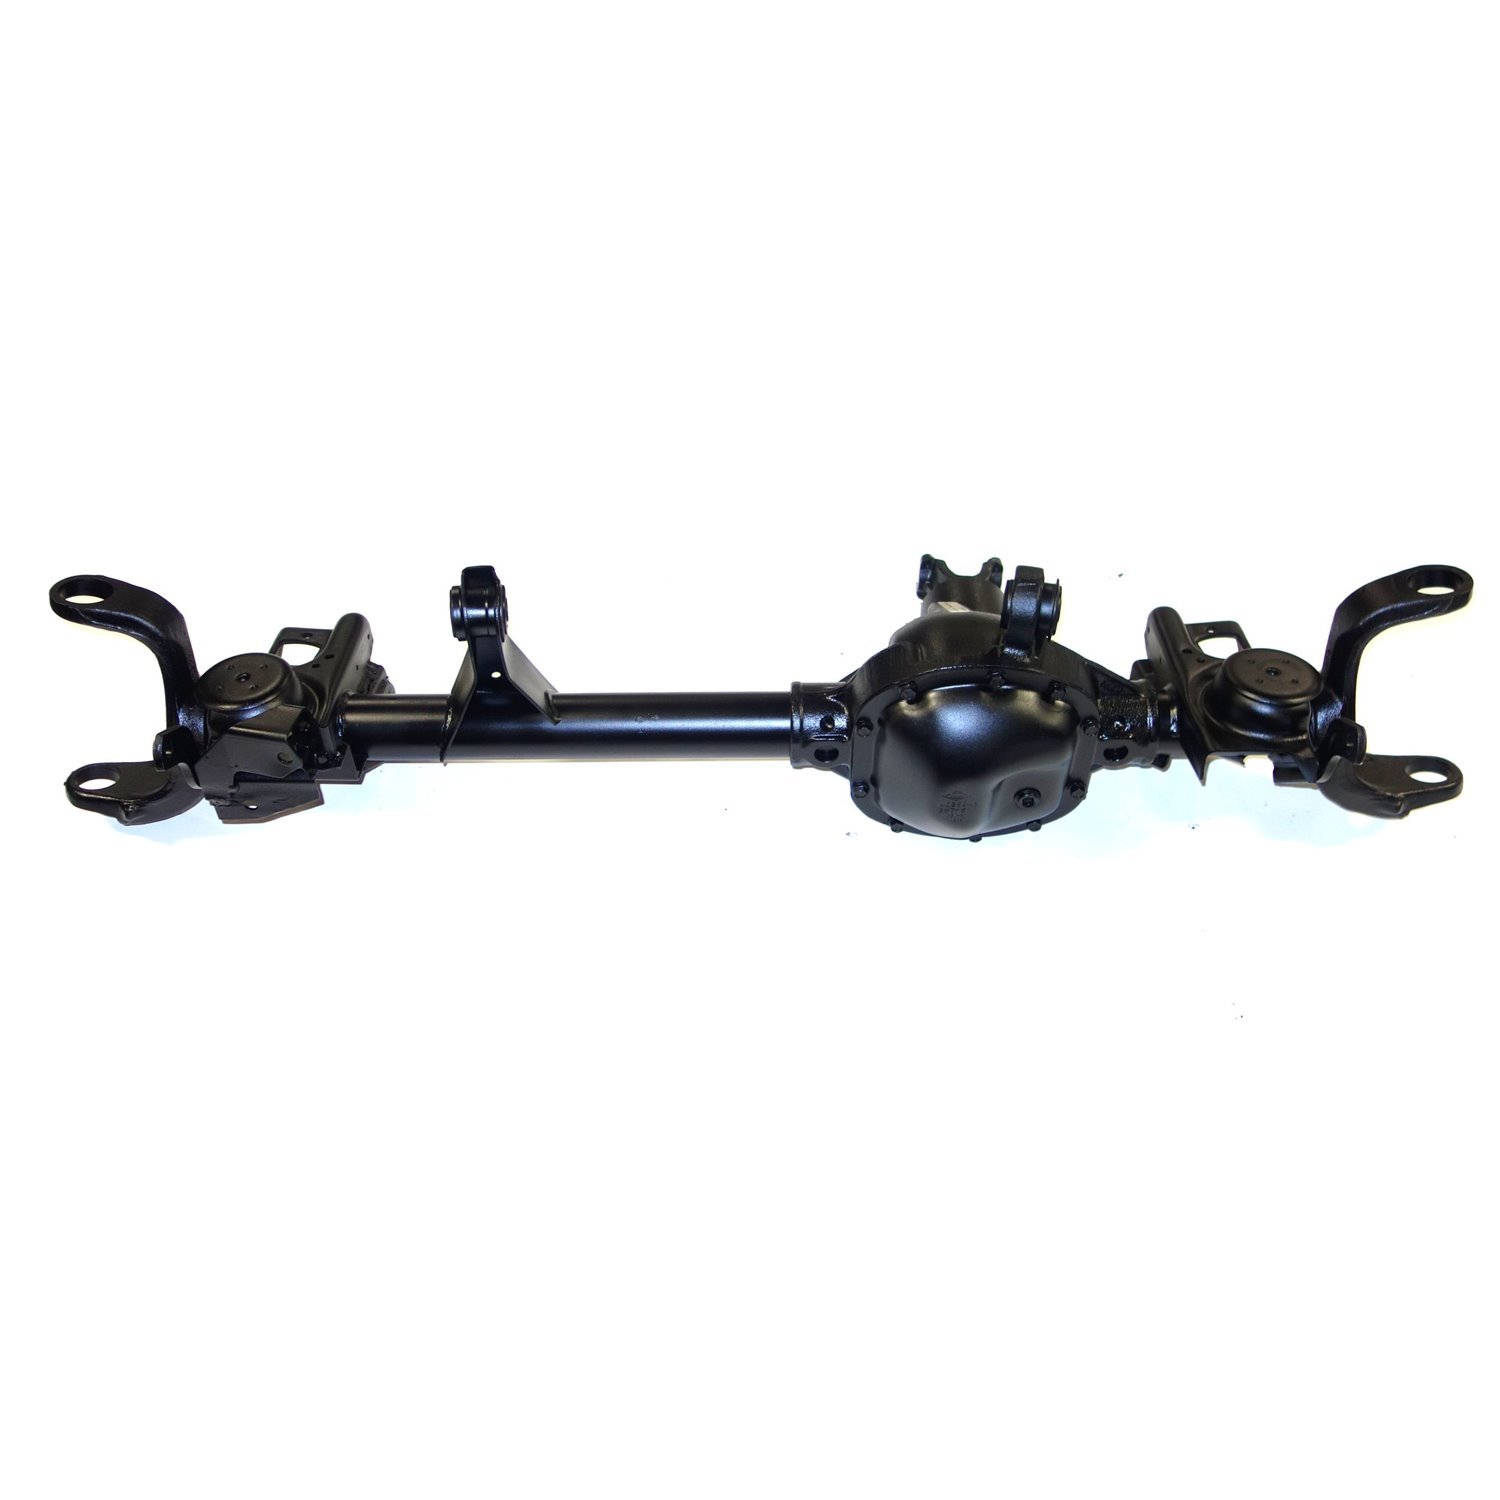 Remanufactured Complete Axle Assembly for Dana 30 94-99 Jeep Cherokee 3.73 Ratio with ABS